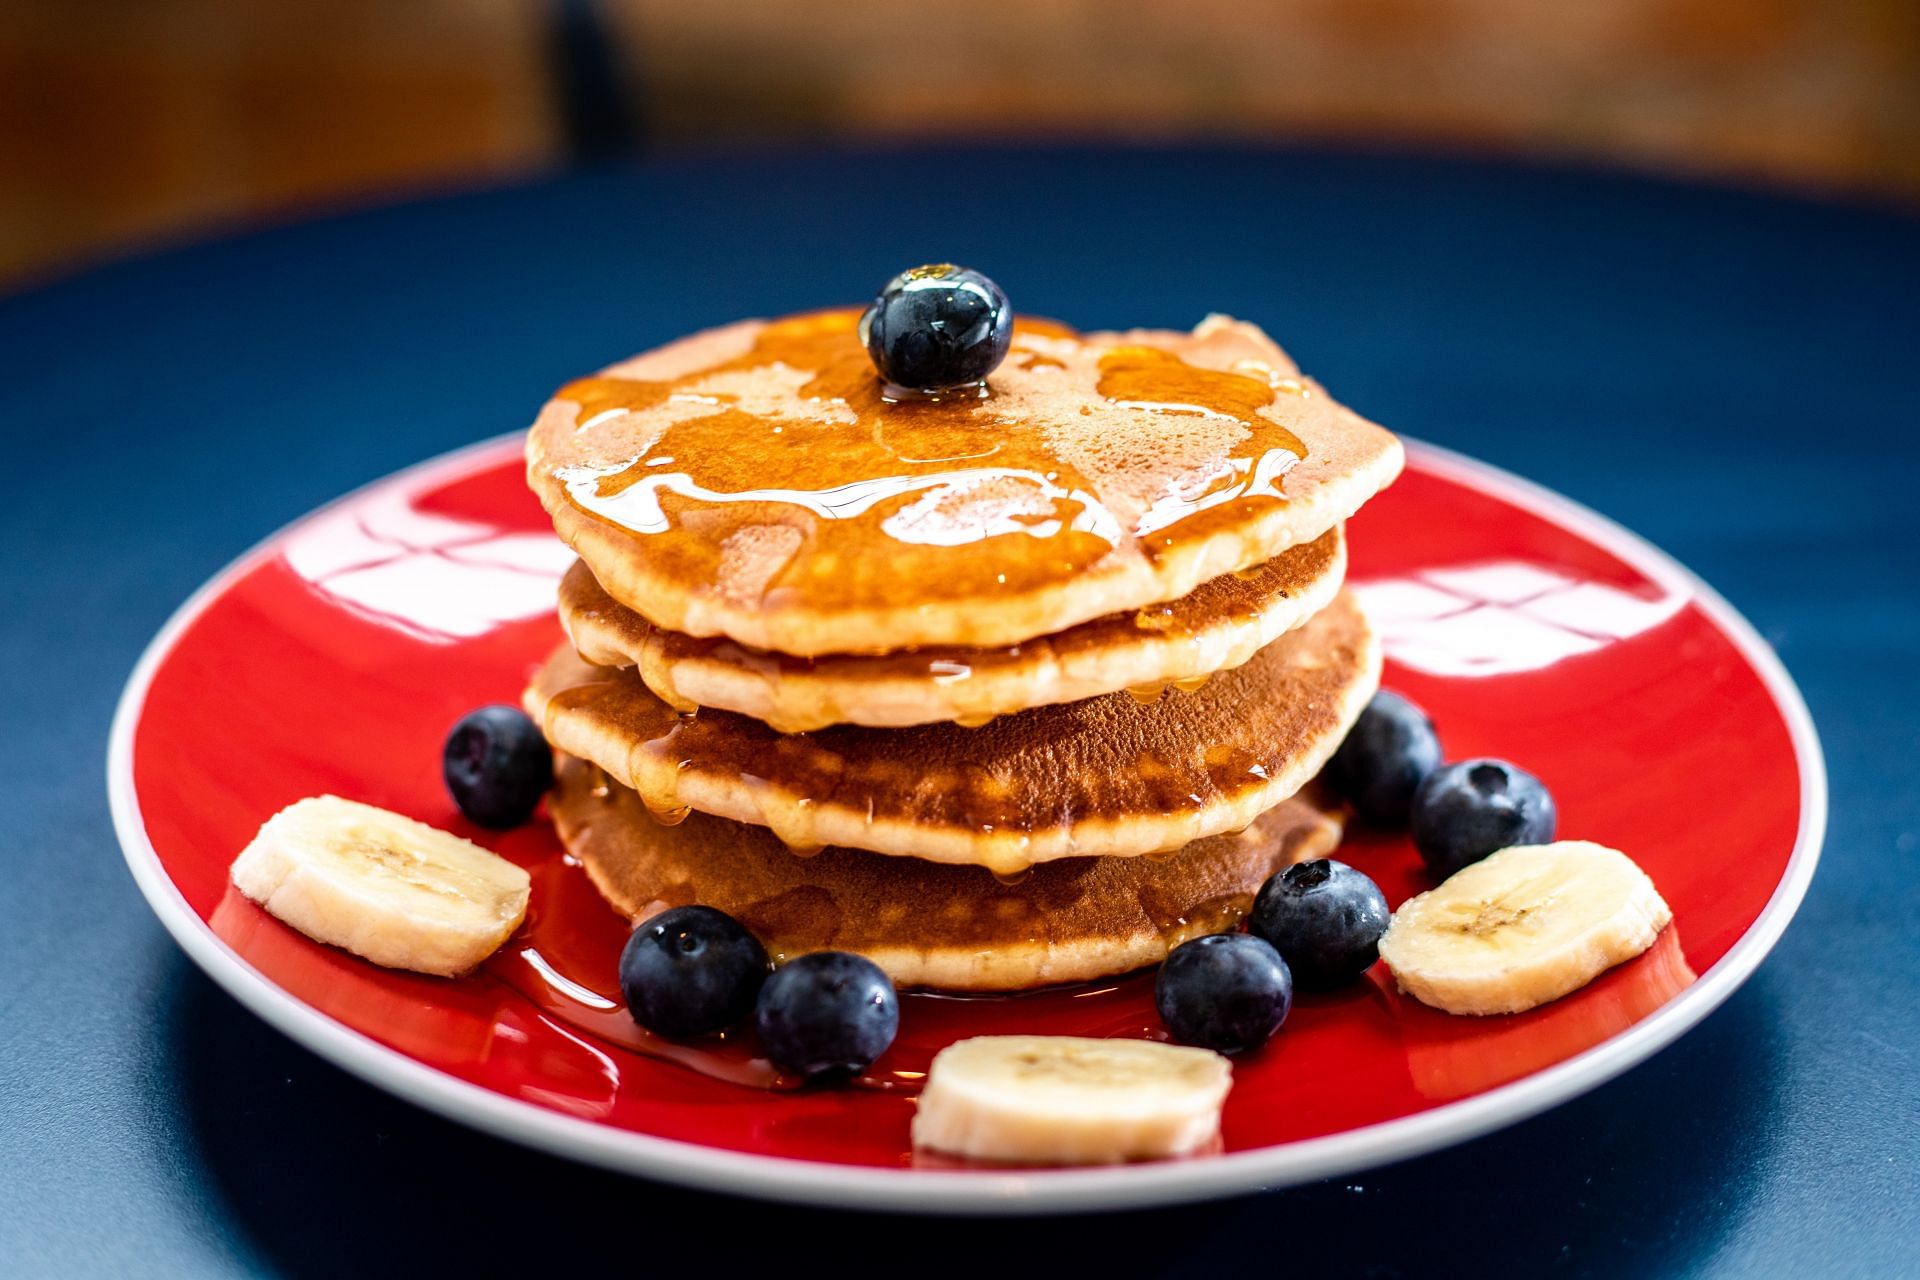 Reducing the calories in pancakes can help with weight loss (Image via Unsplash/Nikldn)